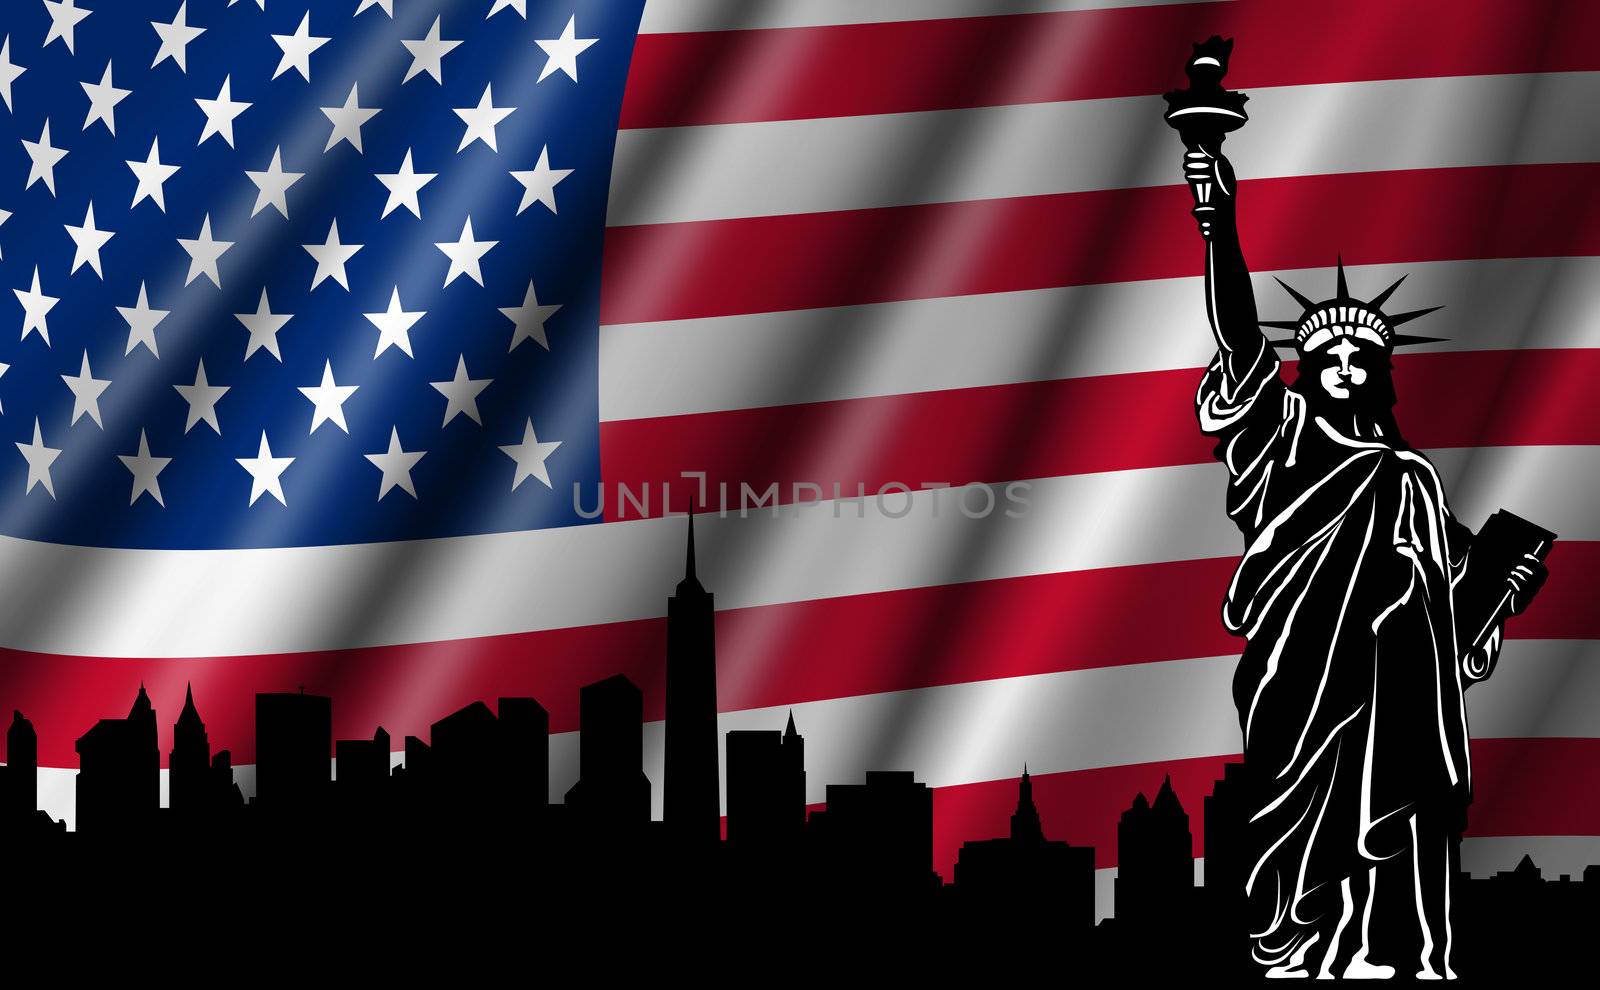 USA American Flag with Statue of Liberty New York Skyline Silhouette Illustration